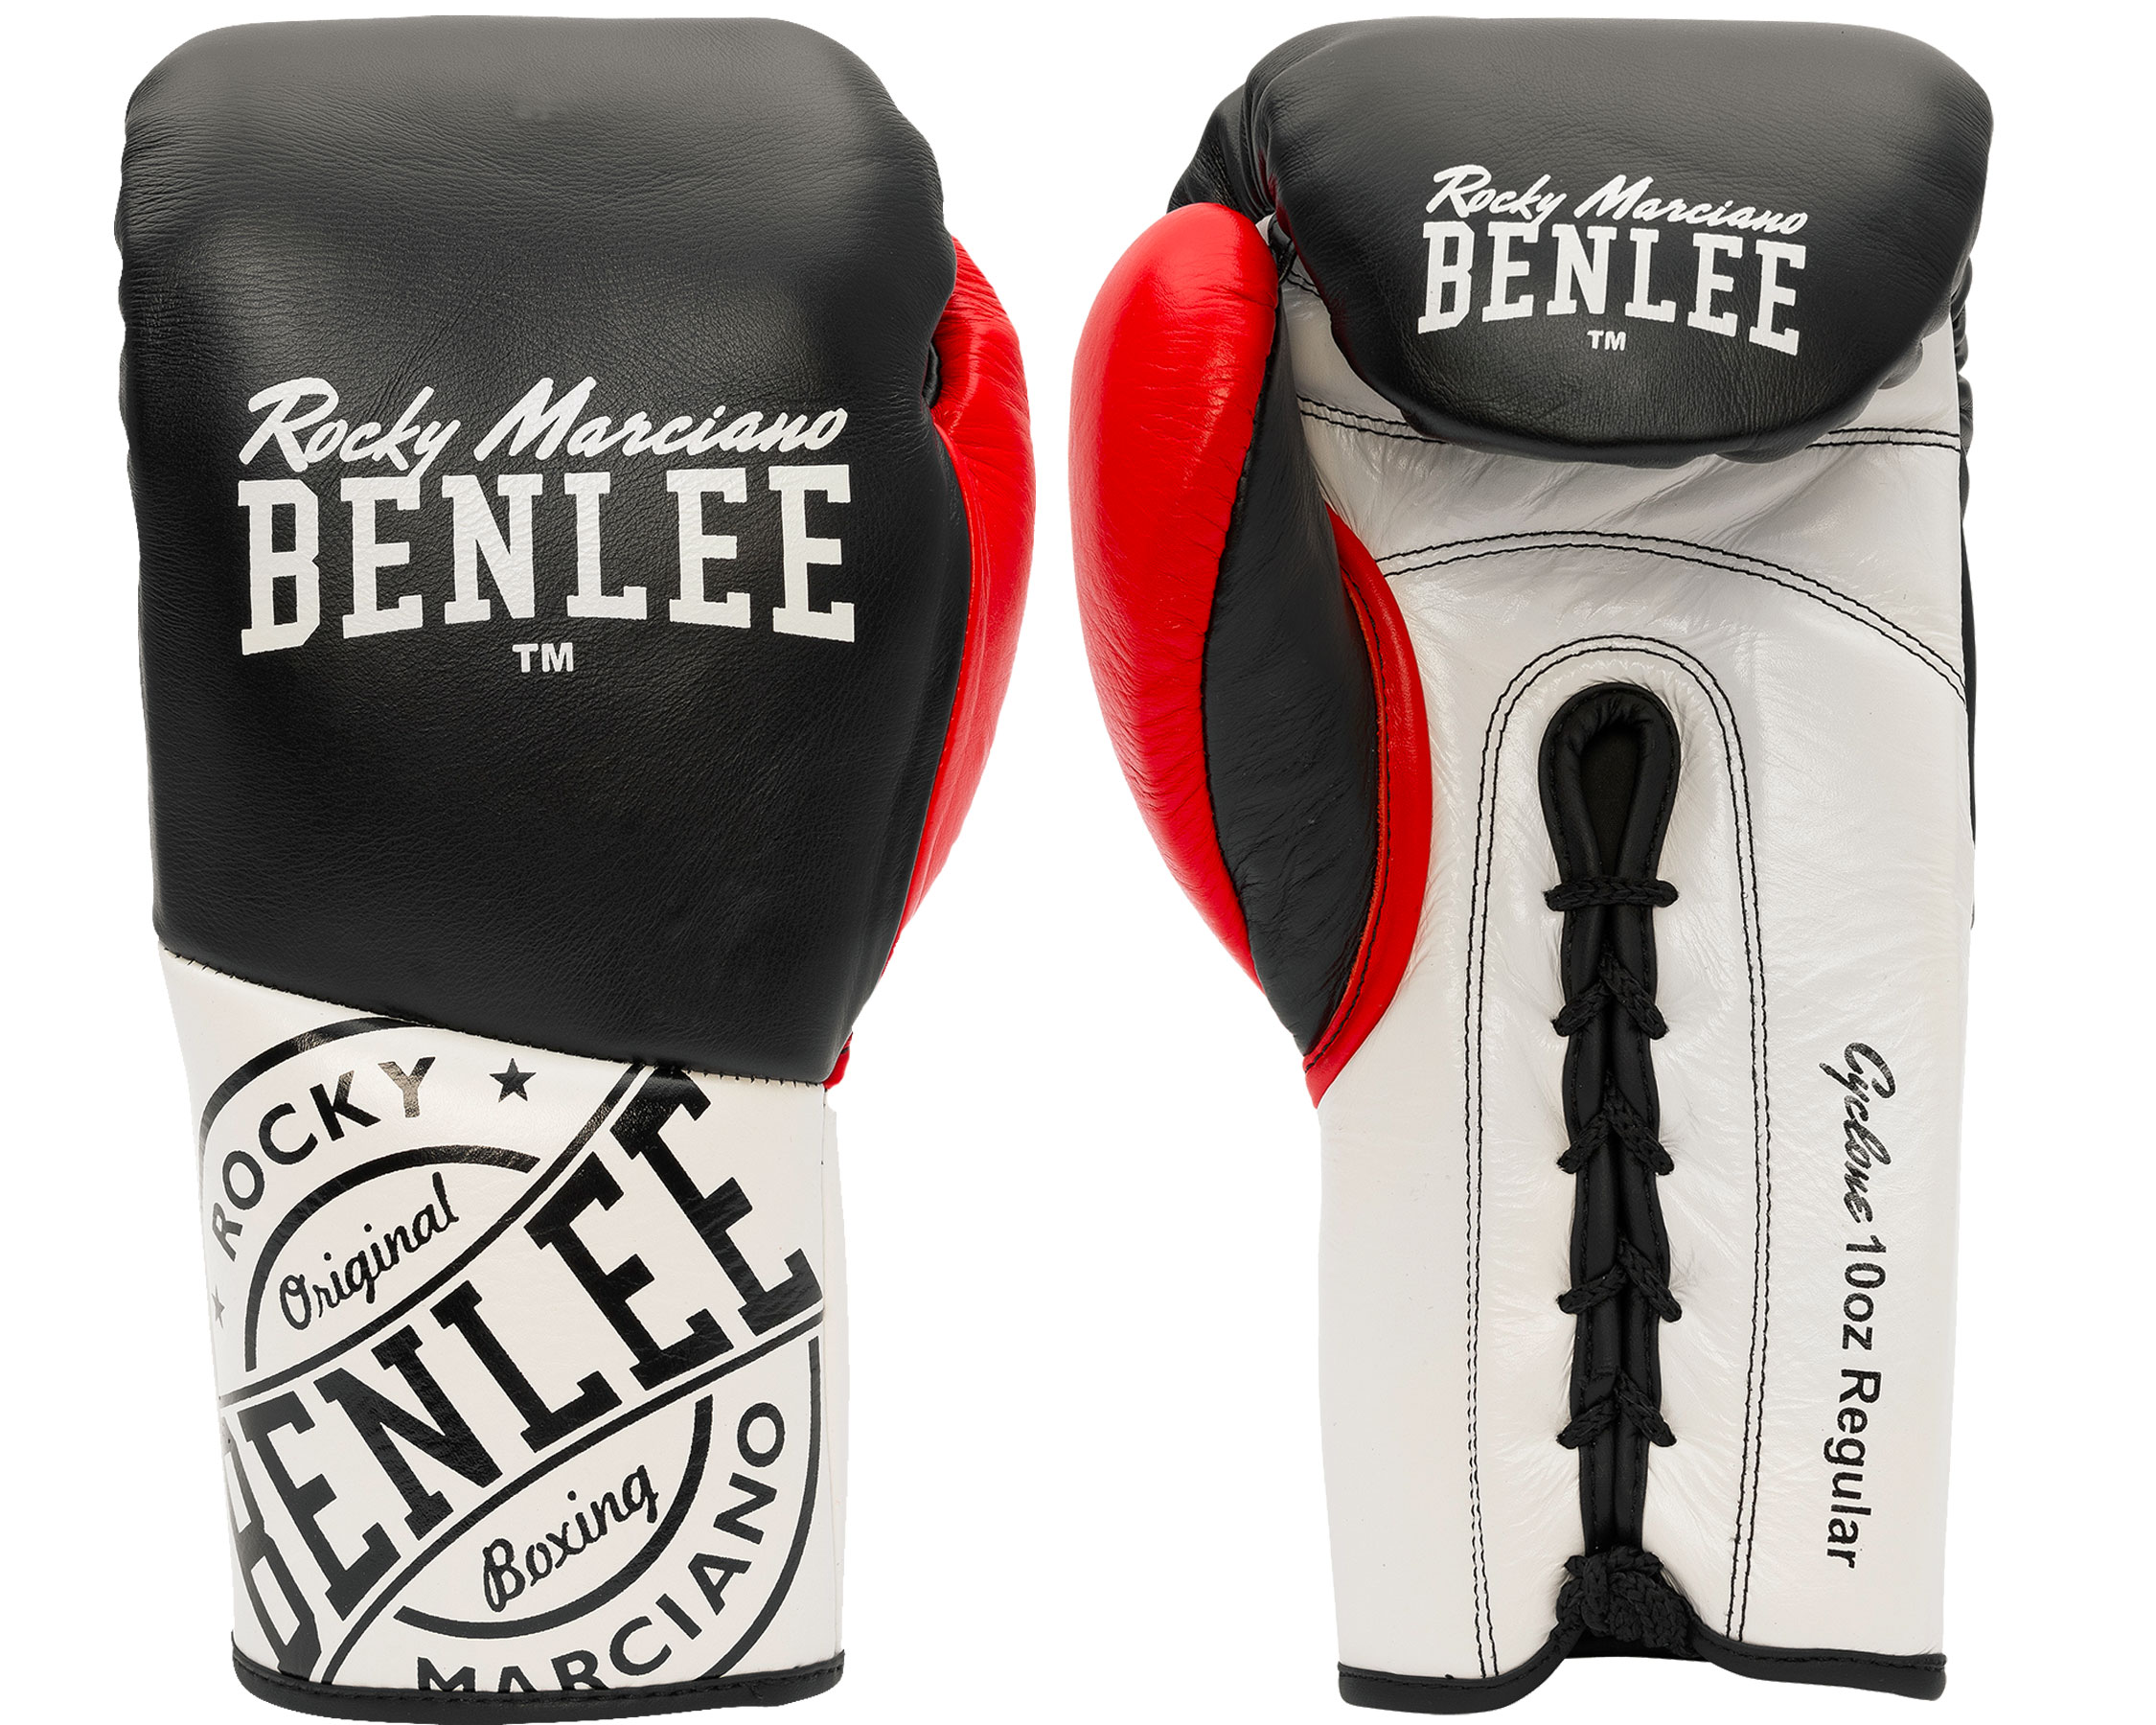 BenLee leather Contest Gloves Cyclone - Boxing gloves, training gloves and  sparring gloves - BenLee sportswear and boxing equipment